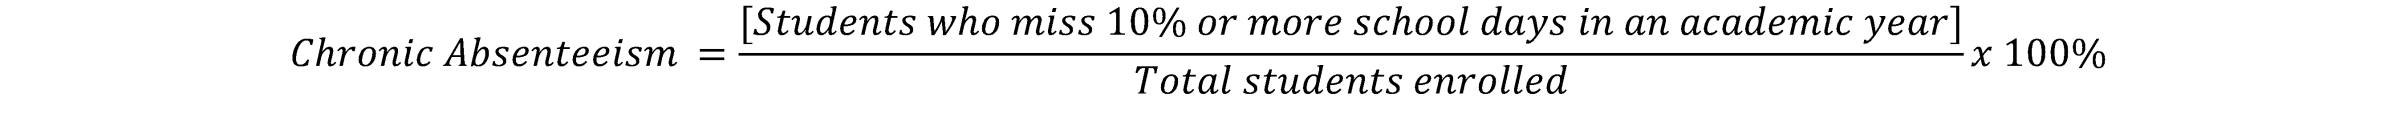 chronic absenteeism calculation